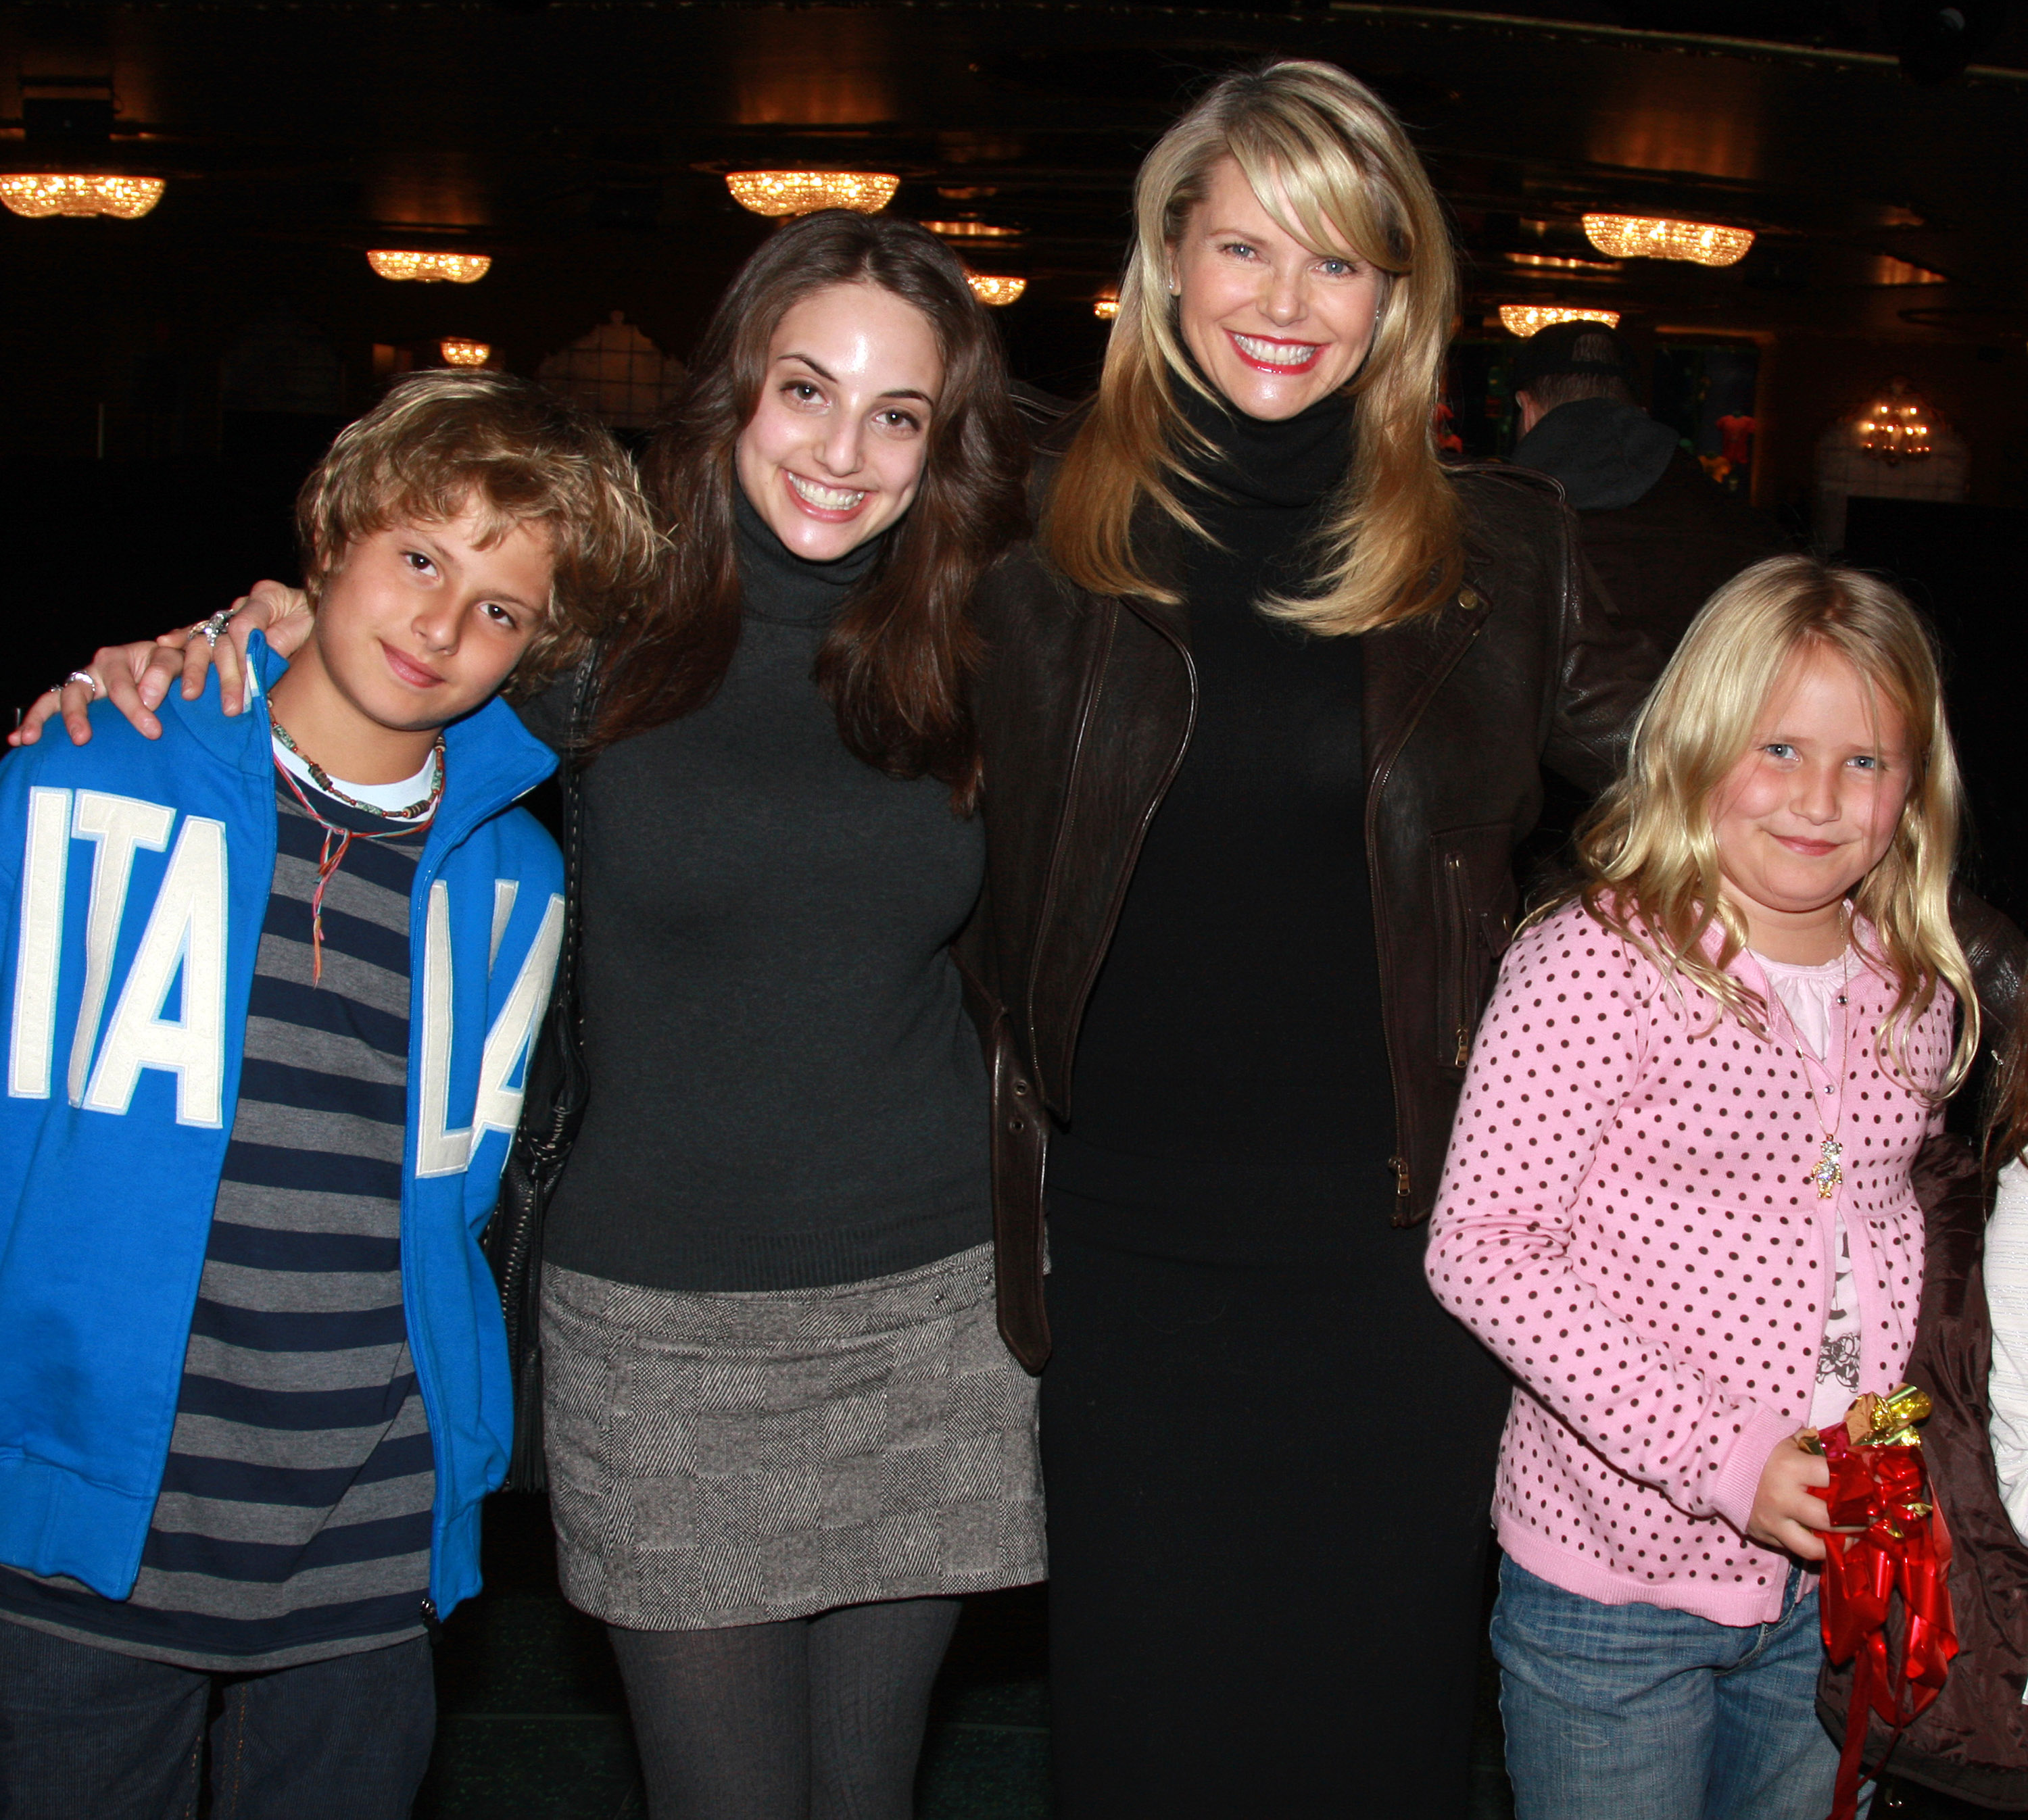 Christie Brinkley poses Jack Cook, Alexa Ray Joel, and Sailor Cook as they visit backstage at "The Little Mermaid" on Broadway in New York City, on January 5, 2008. | Source: Getty Images